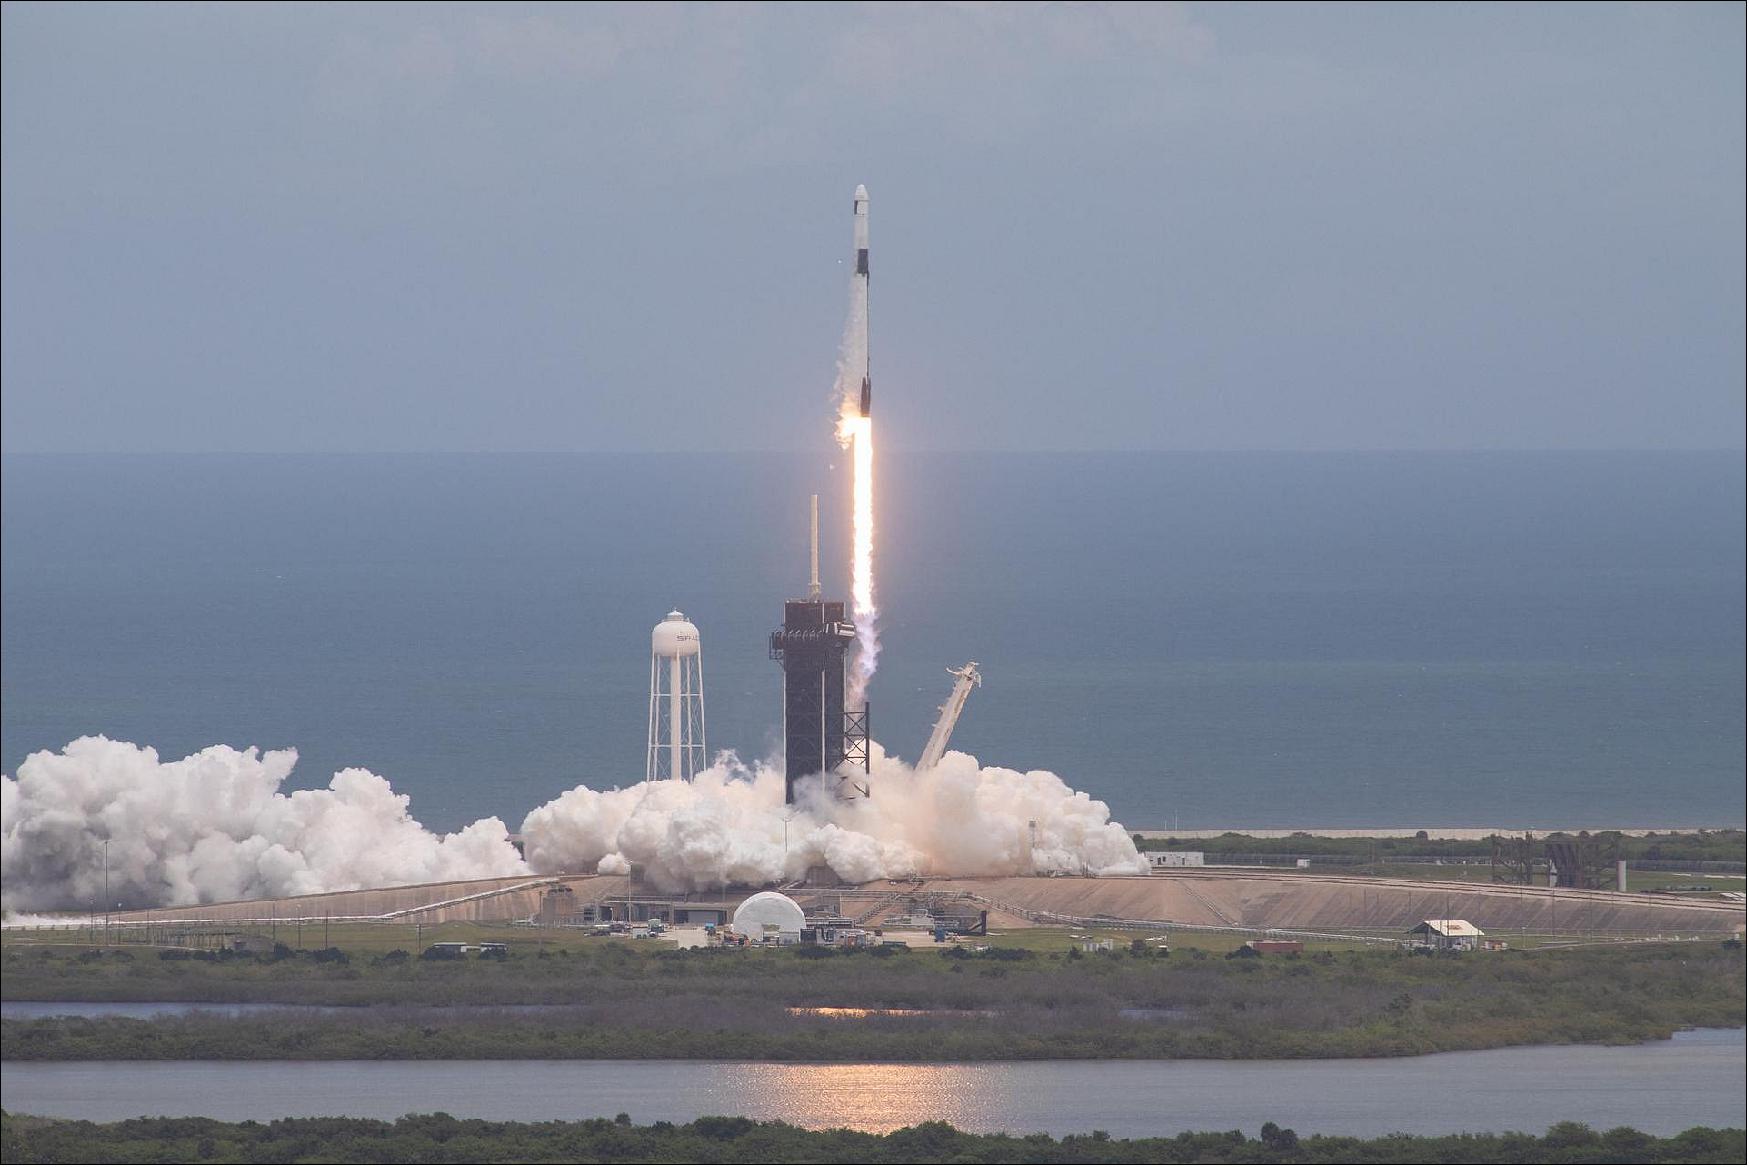 Figure 1: he SpaceX Falcon 9 rocket carrying the Dragon cargo capsule lifts off from Launch Complex 39A at NASA’s Kennedy Space Center in Florida on June 3, 2021, on the company’s 22nd Commercial Resupply Services mission for the agency to the International Space Station(photo credit: NASA/Kim Shiflett) 3)